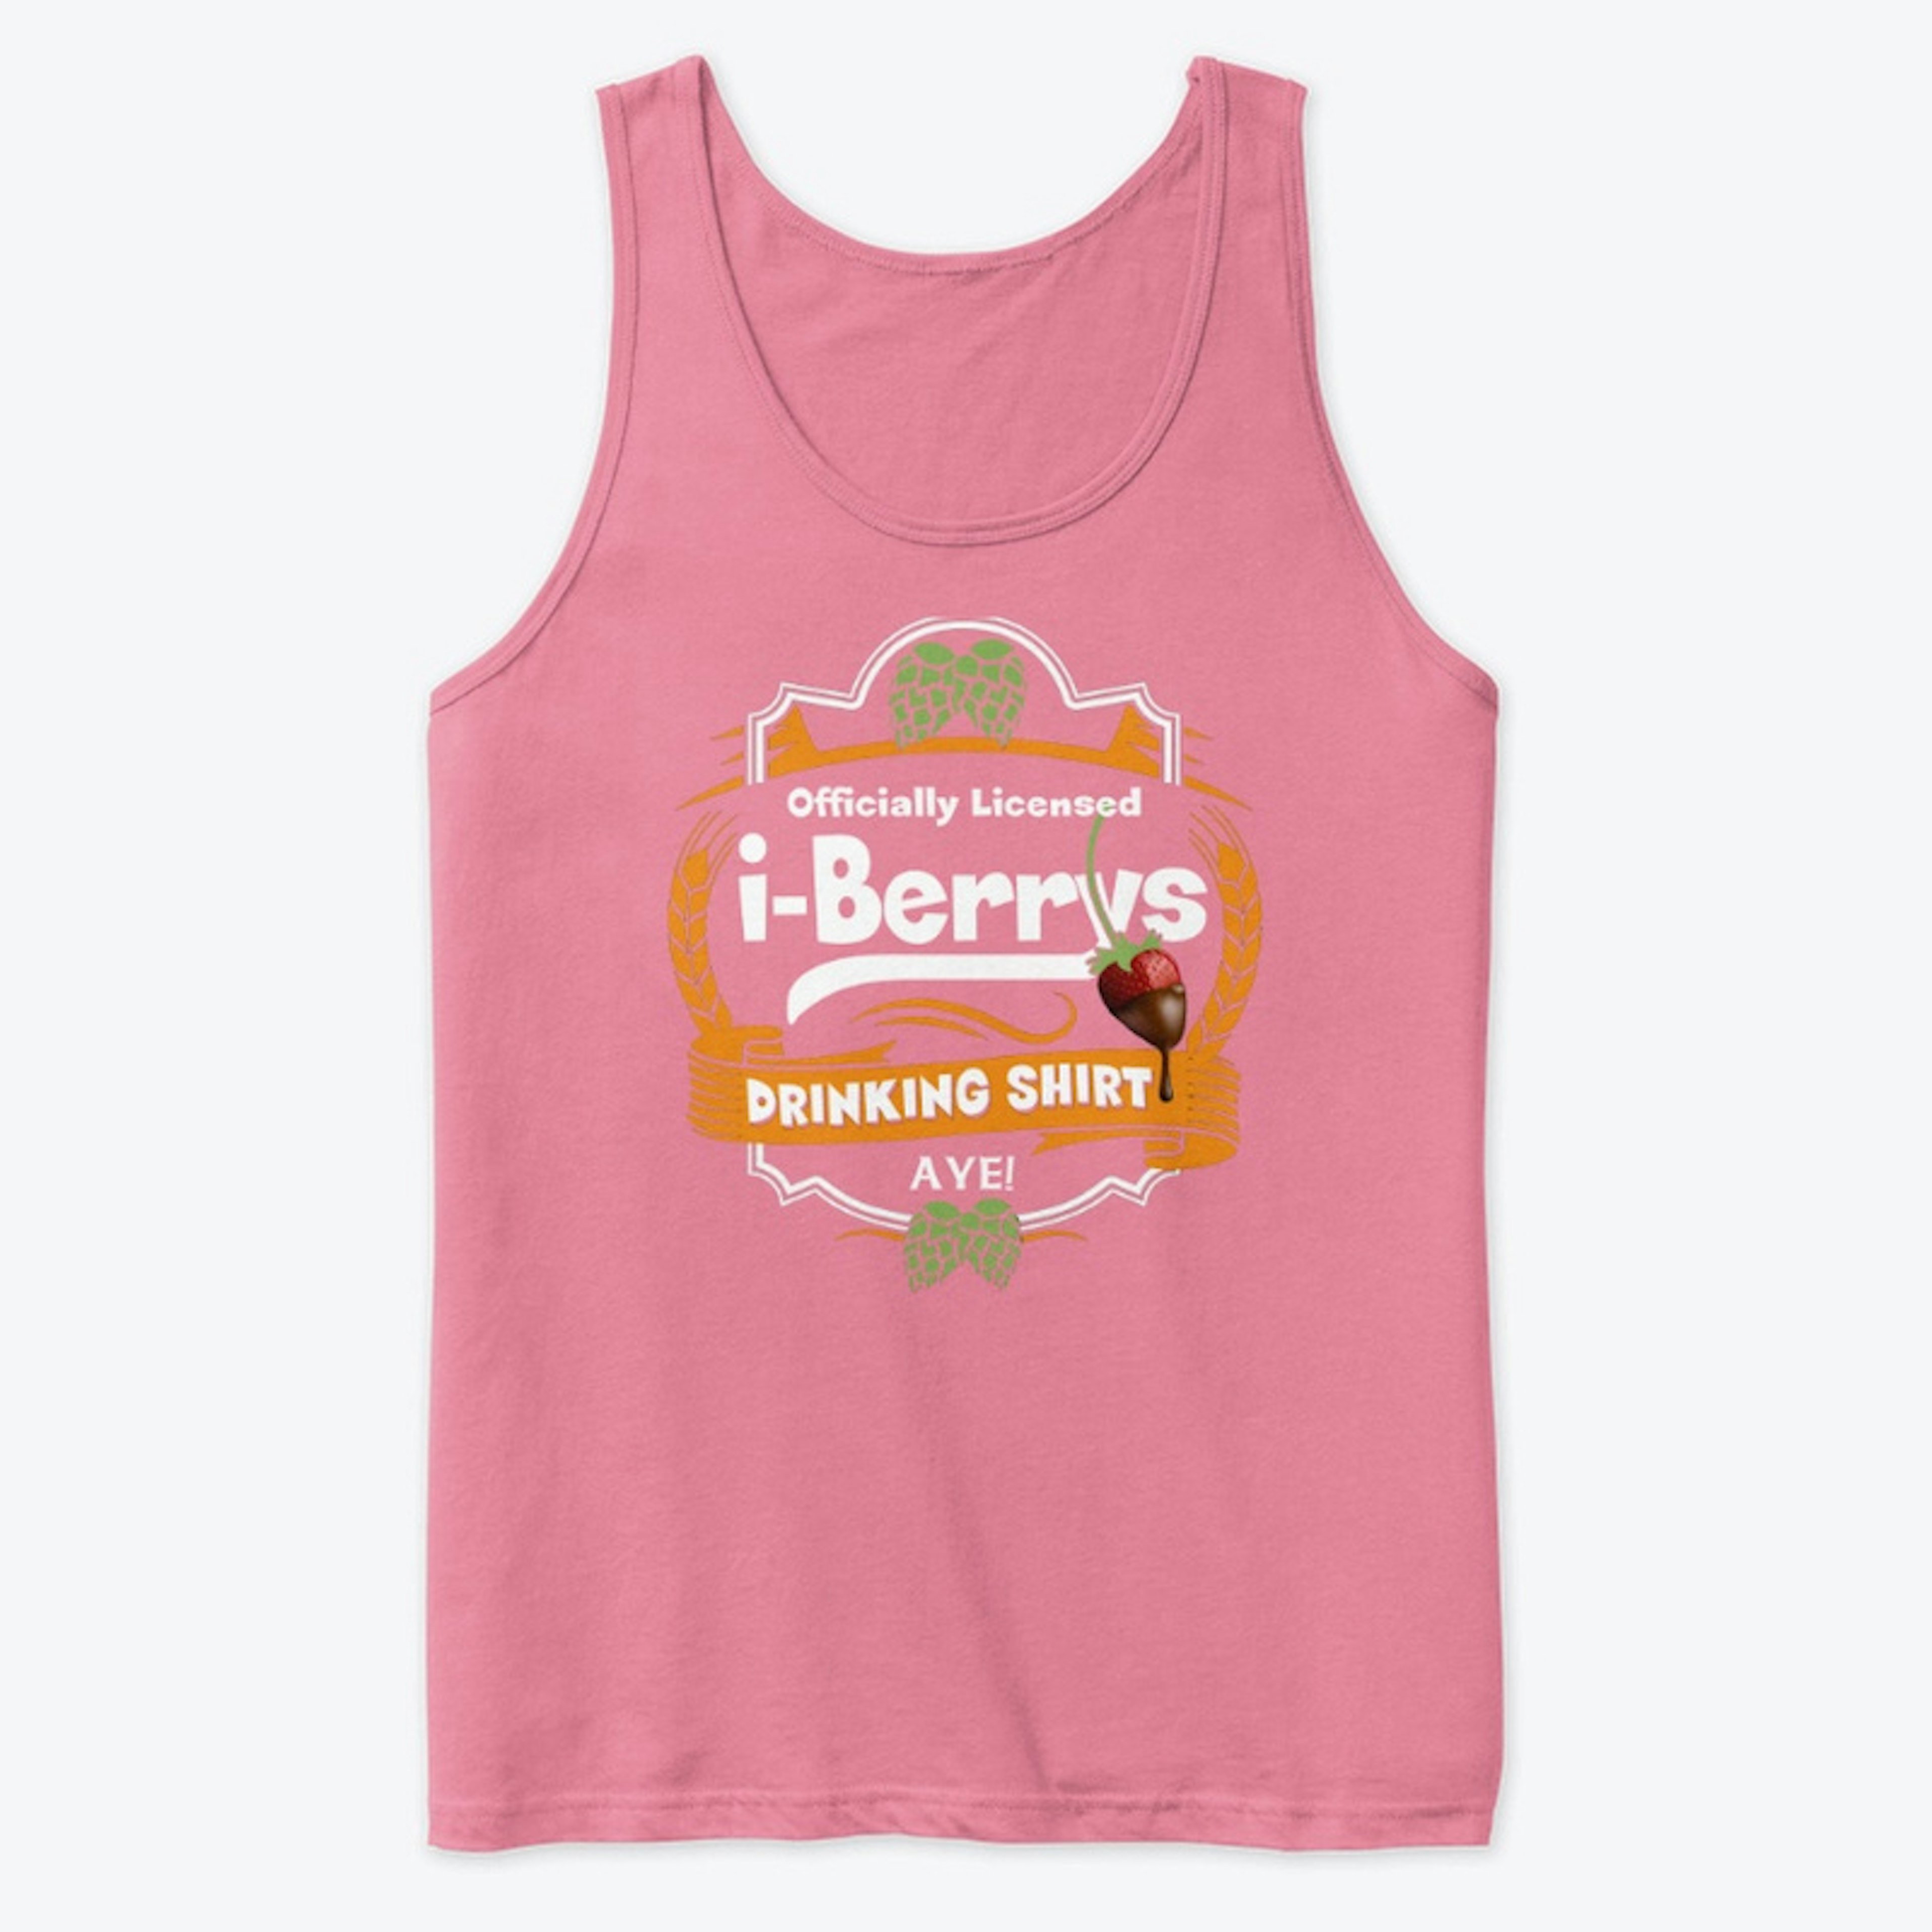 Officially Licensed Drinking Tank